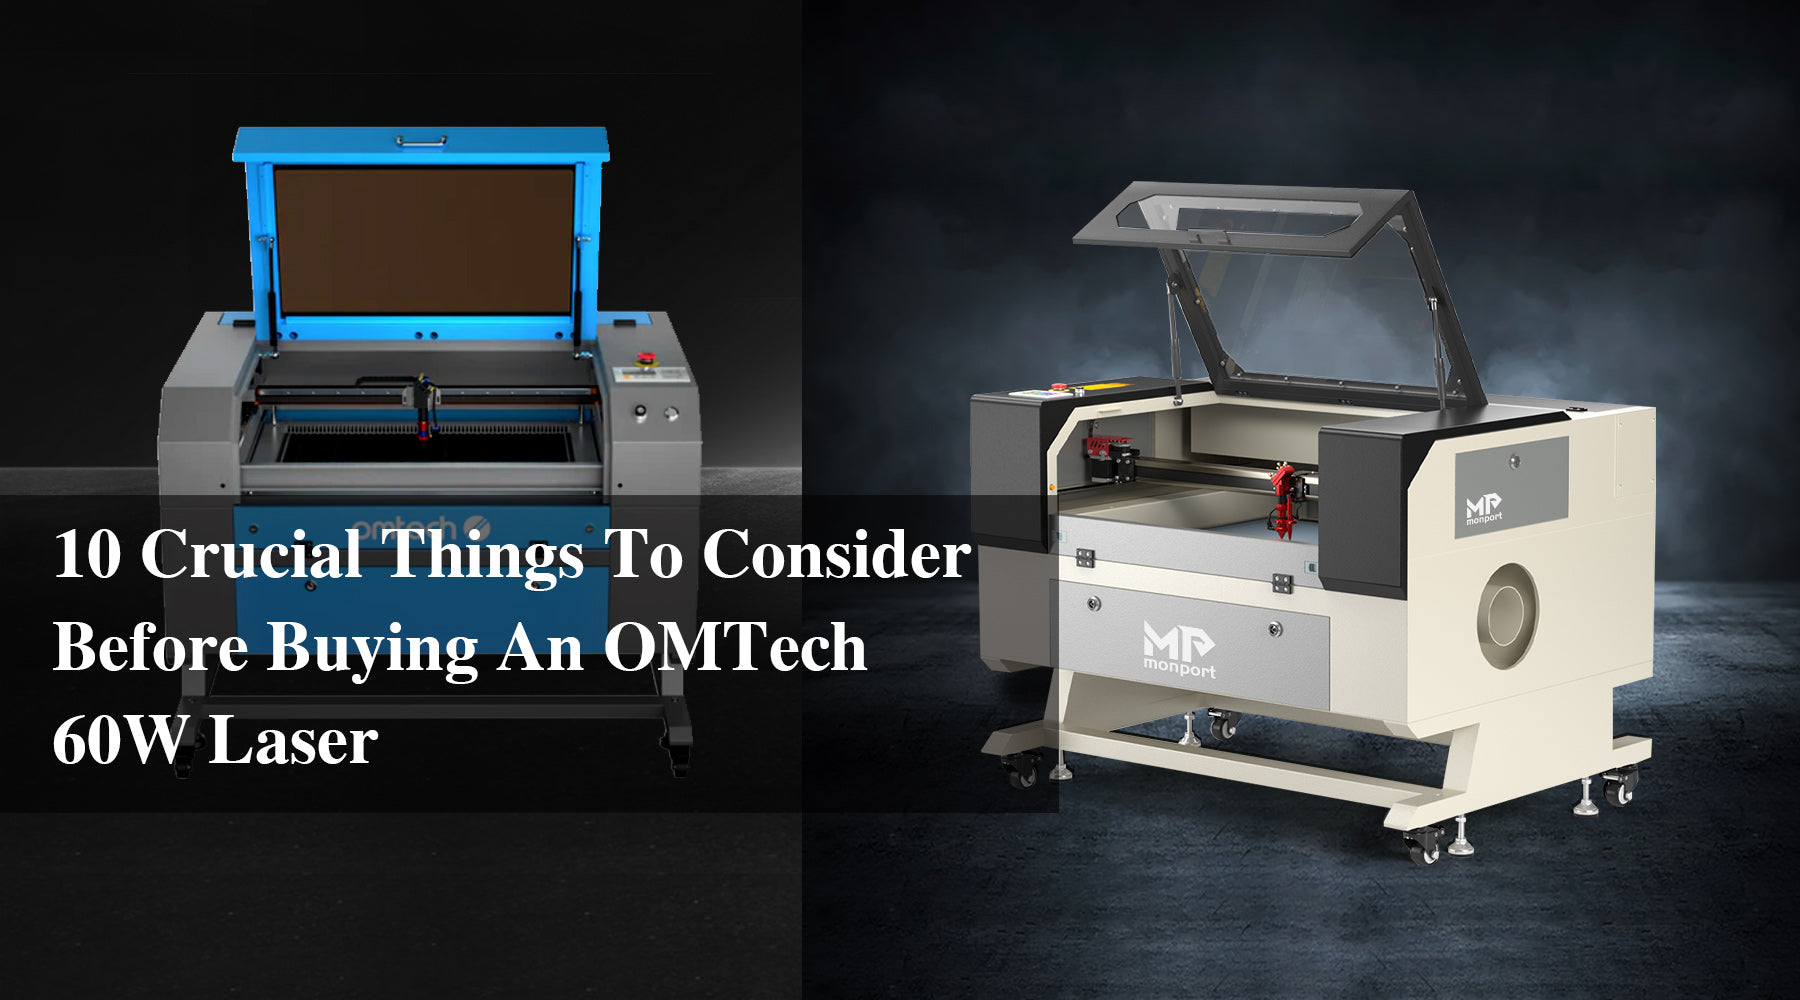 10 Crucial Things To Consider Before Buying An OMTech 60W Laser